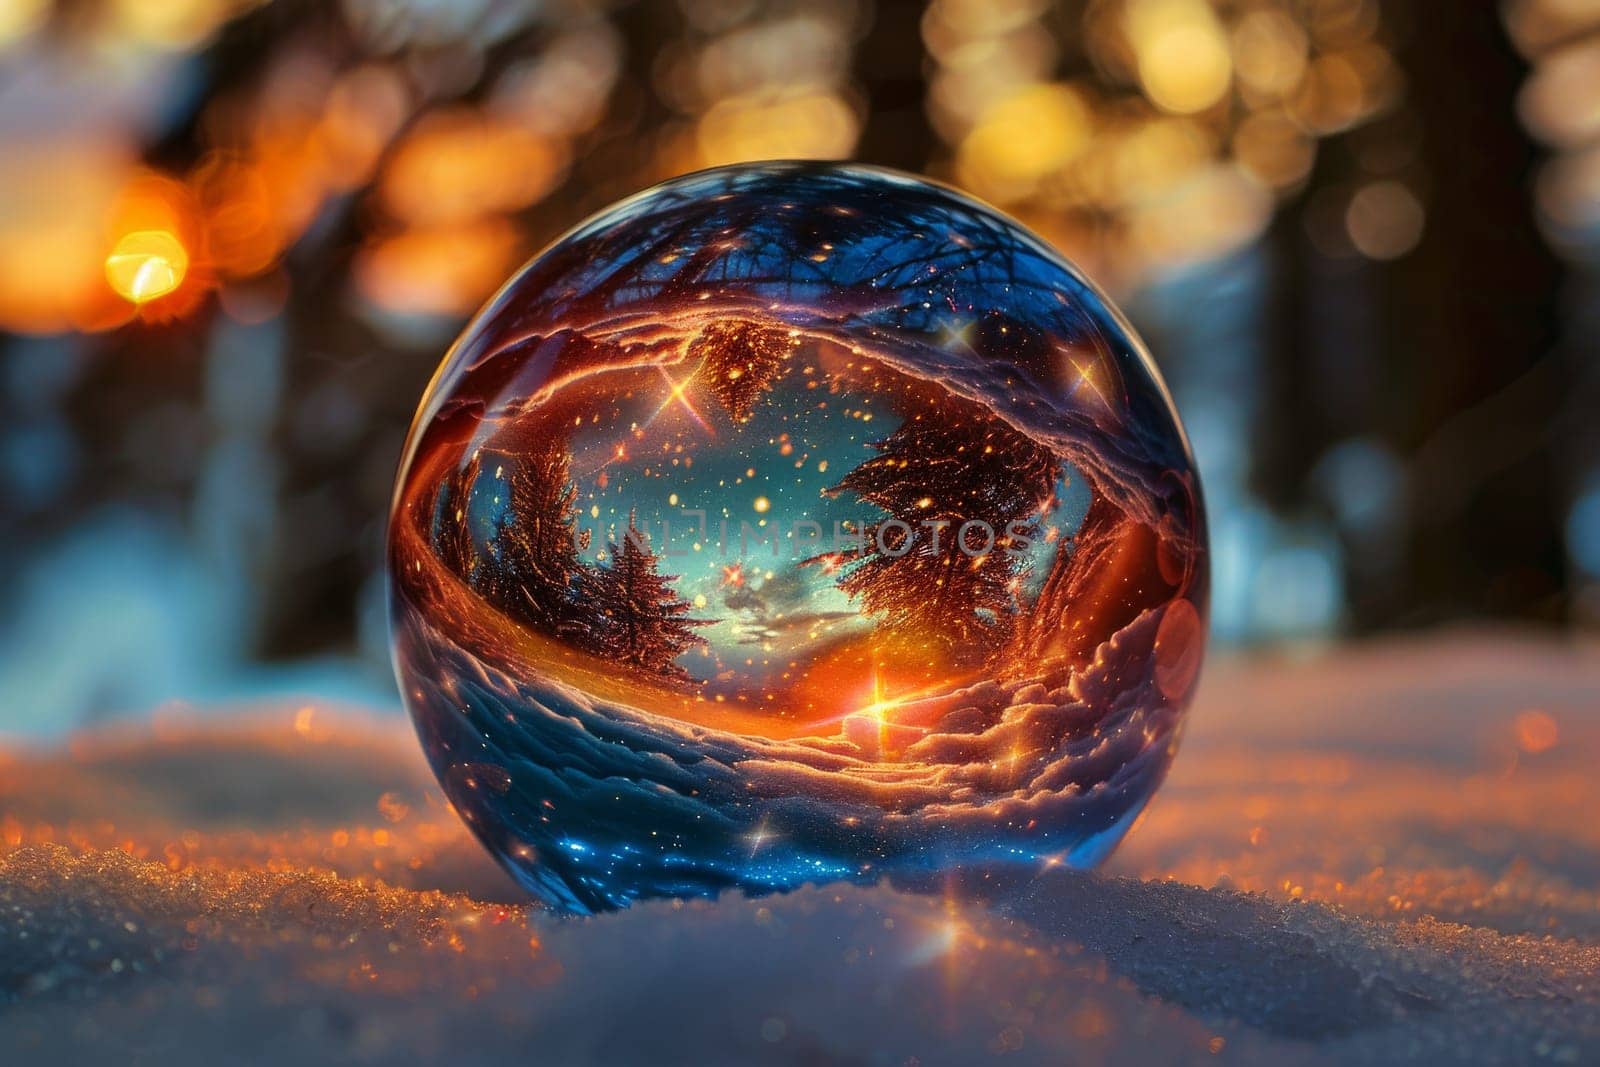 A glass ball with a reflection of a forest and a sunset by itchaznong